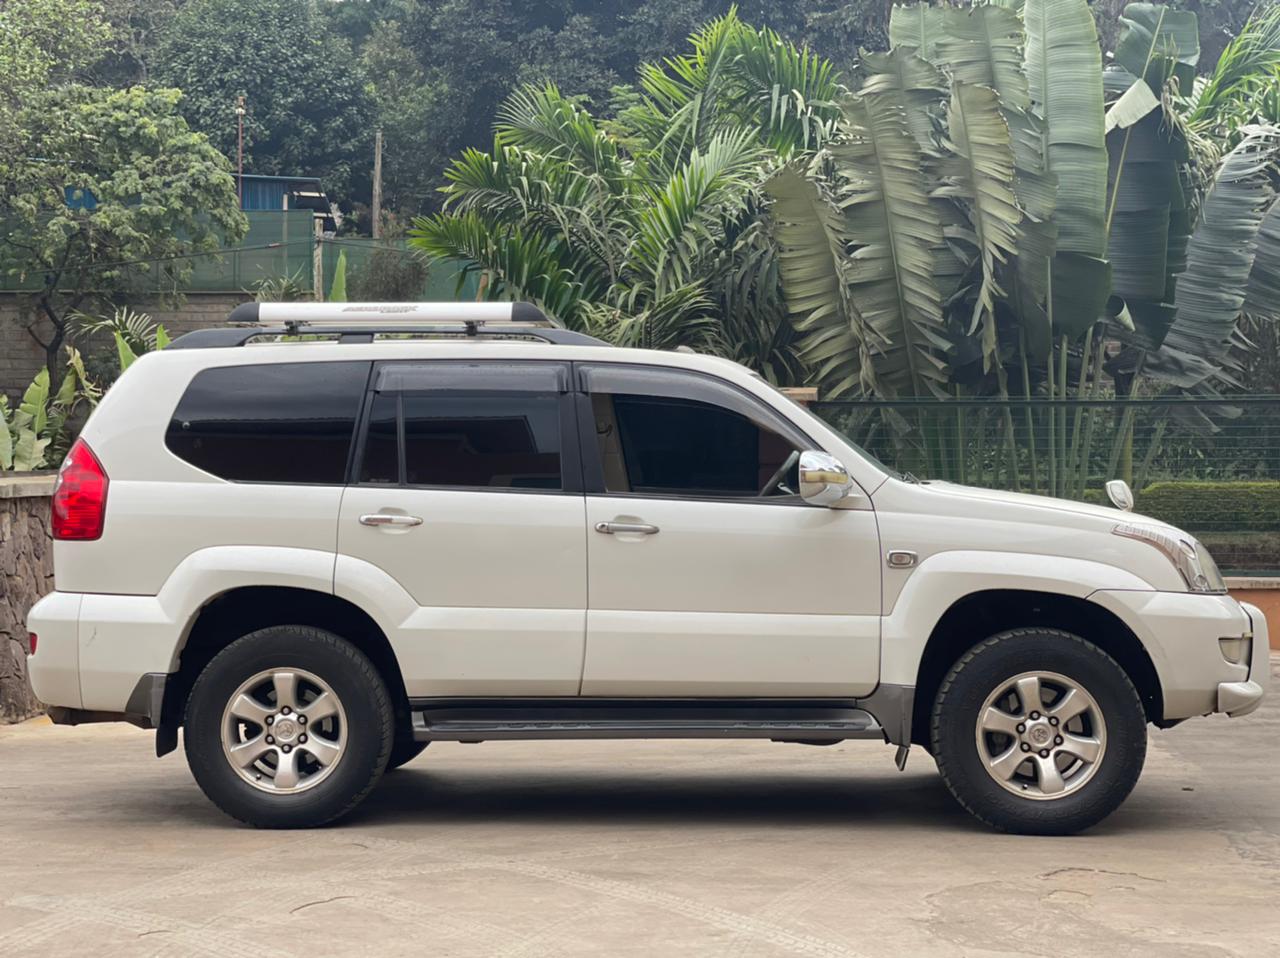 Toyota Prado 1.5M  Sunroof 7 Leather seats -Pay 20% 80% in 60 MONTHLY INSTALLMENTS